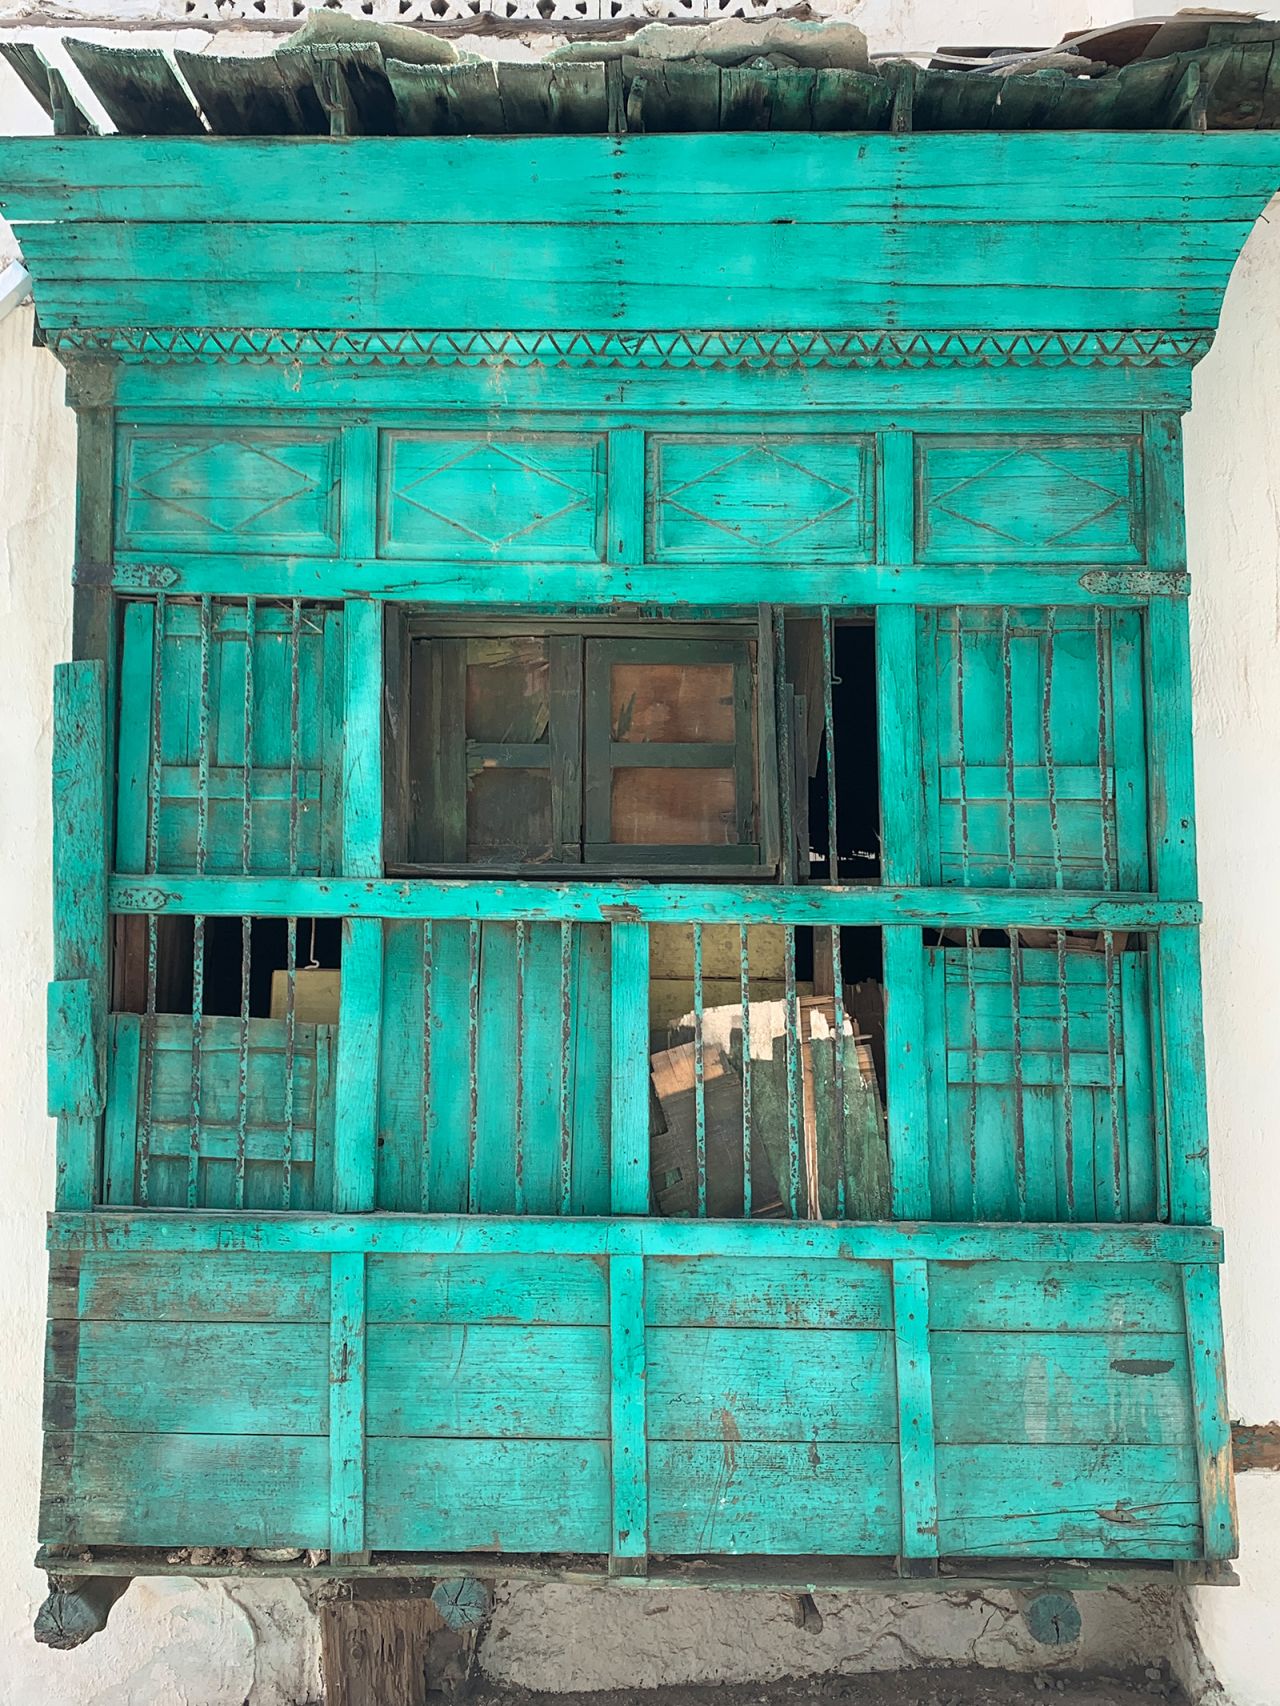 A typical rowshan window covering on an Al Balad building.